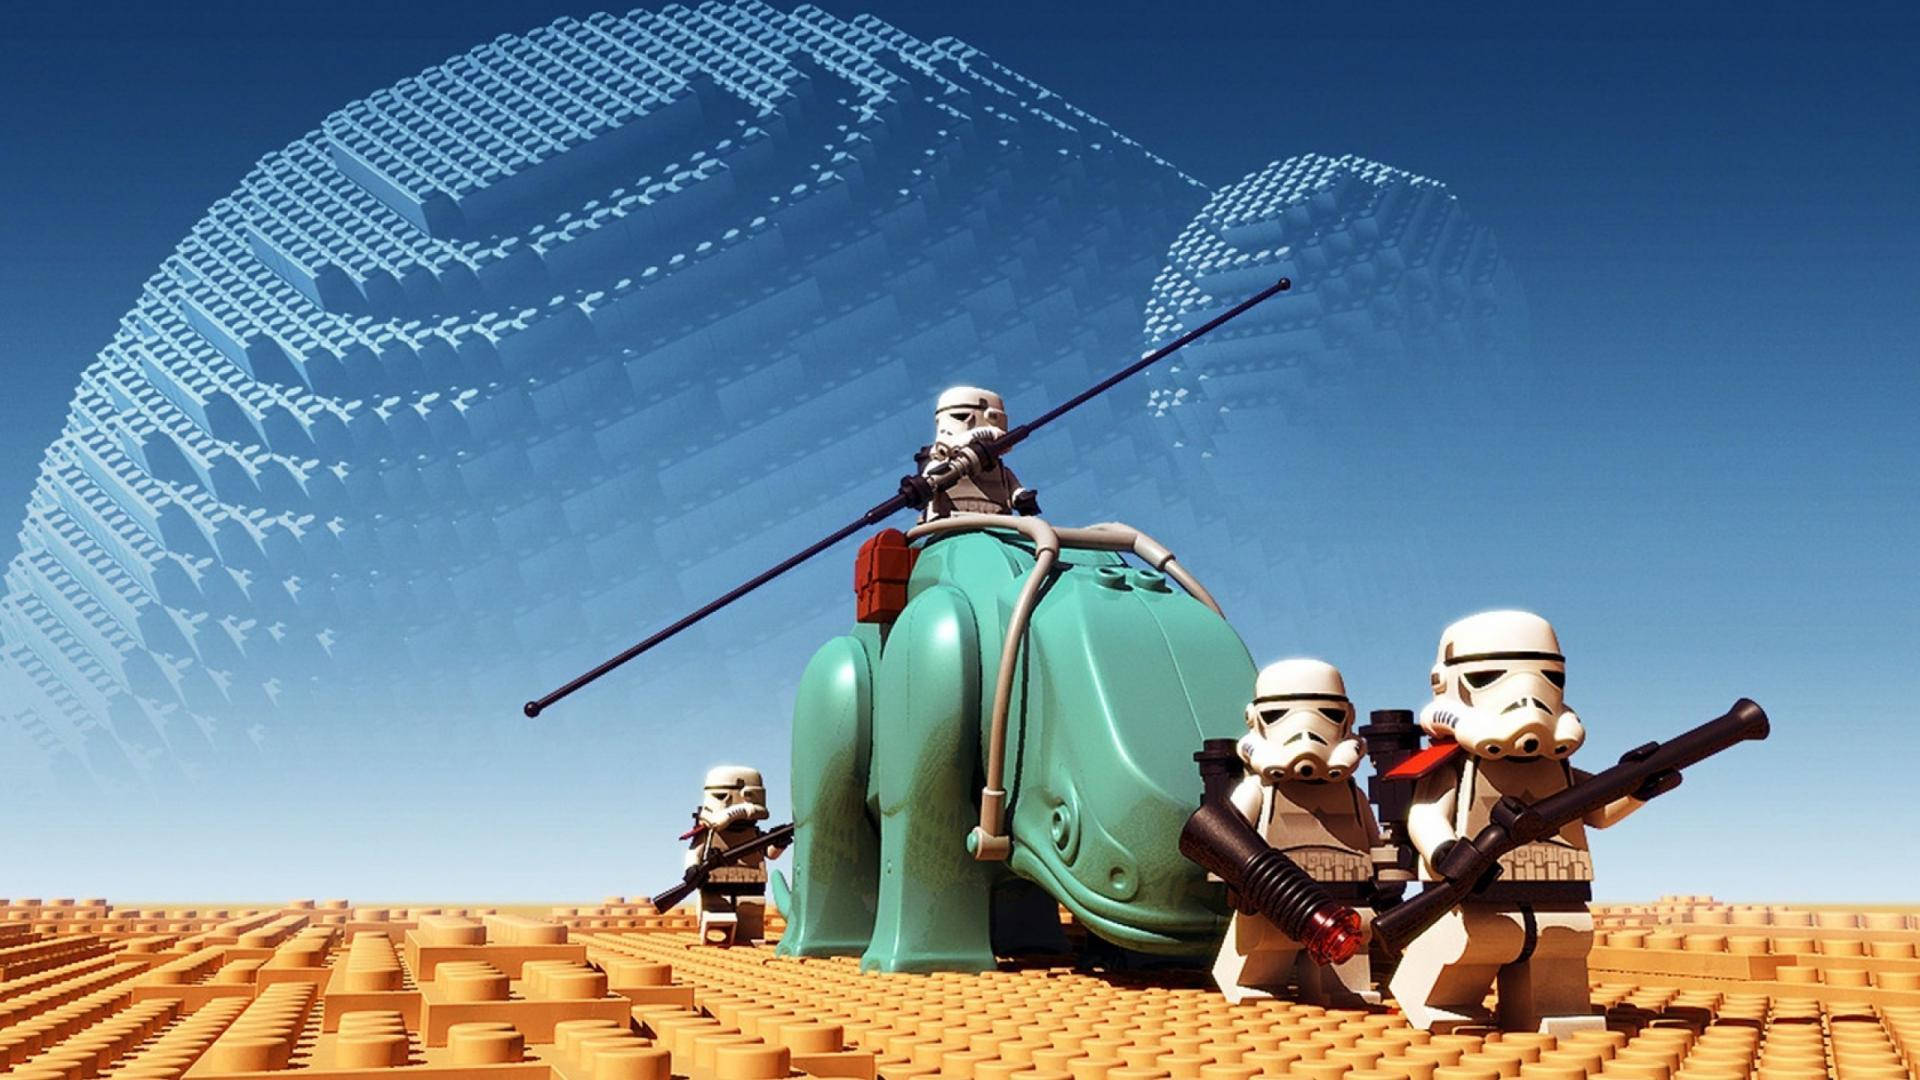 Bring the Lego Wars to life Wallpaper